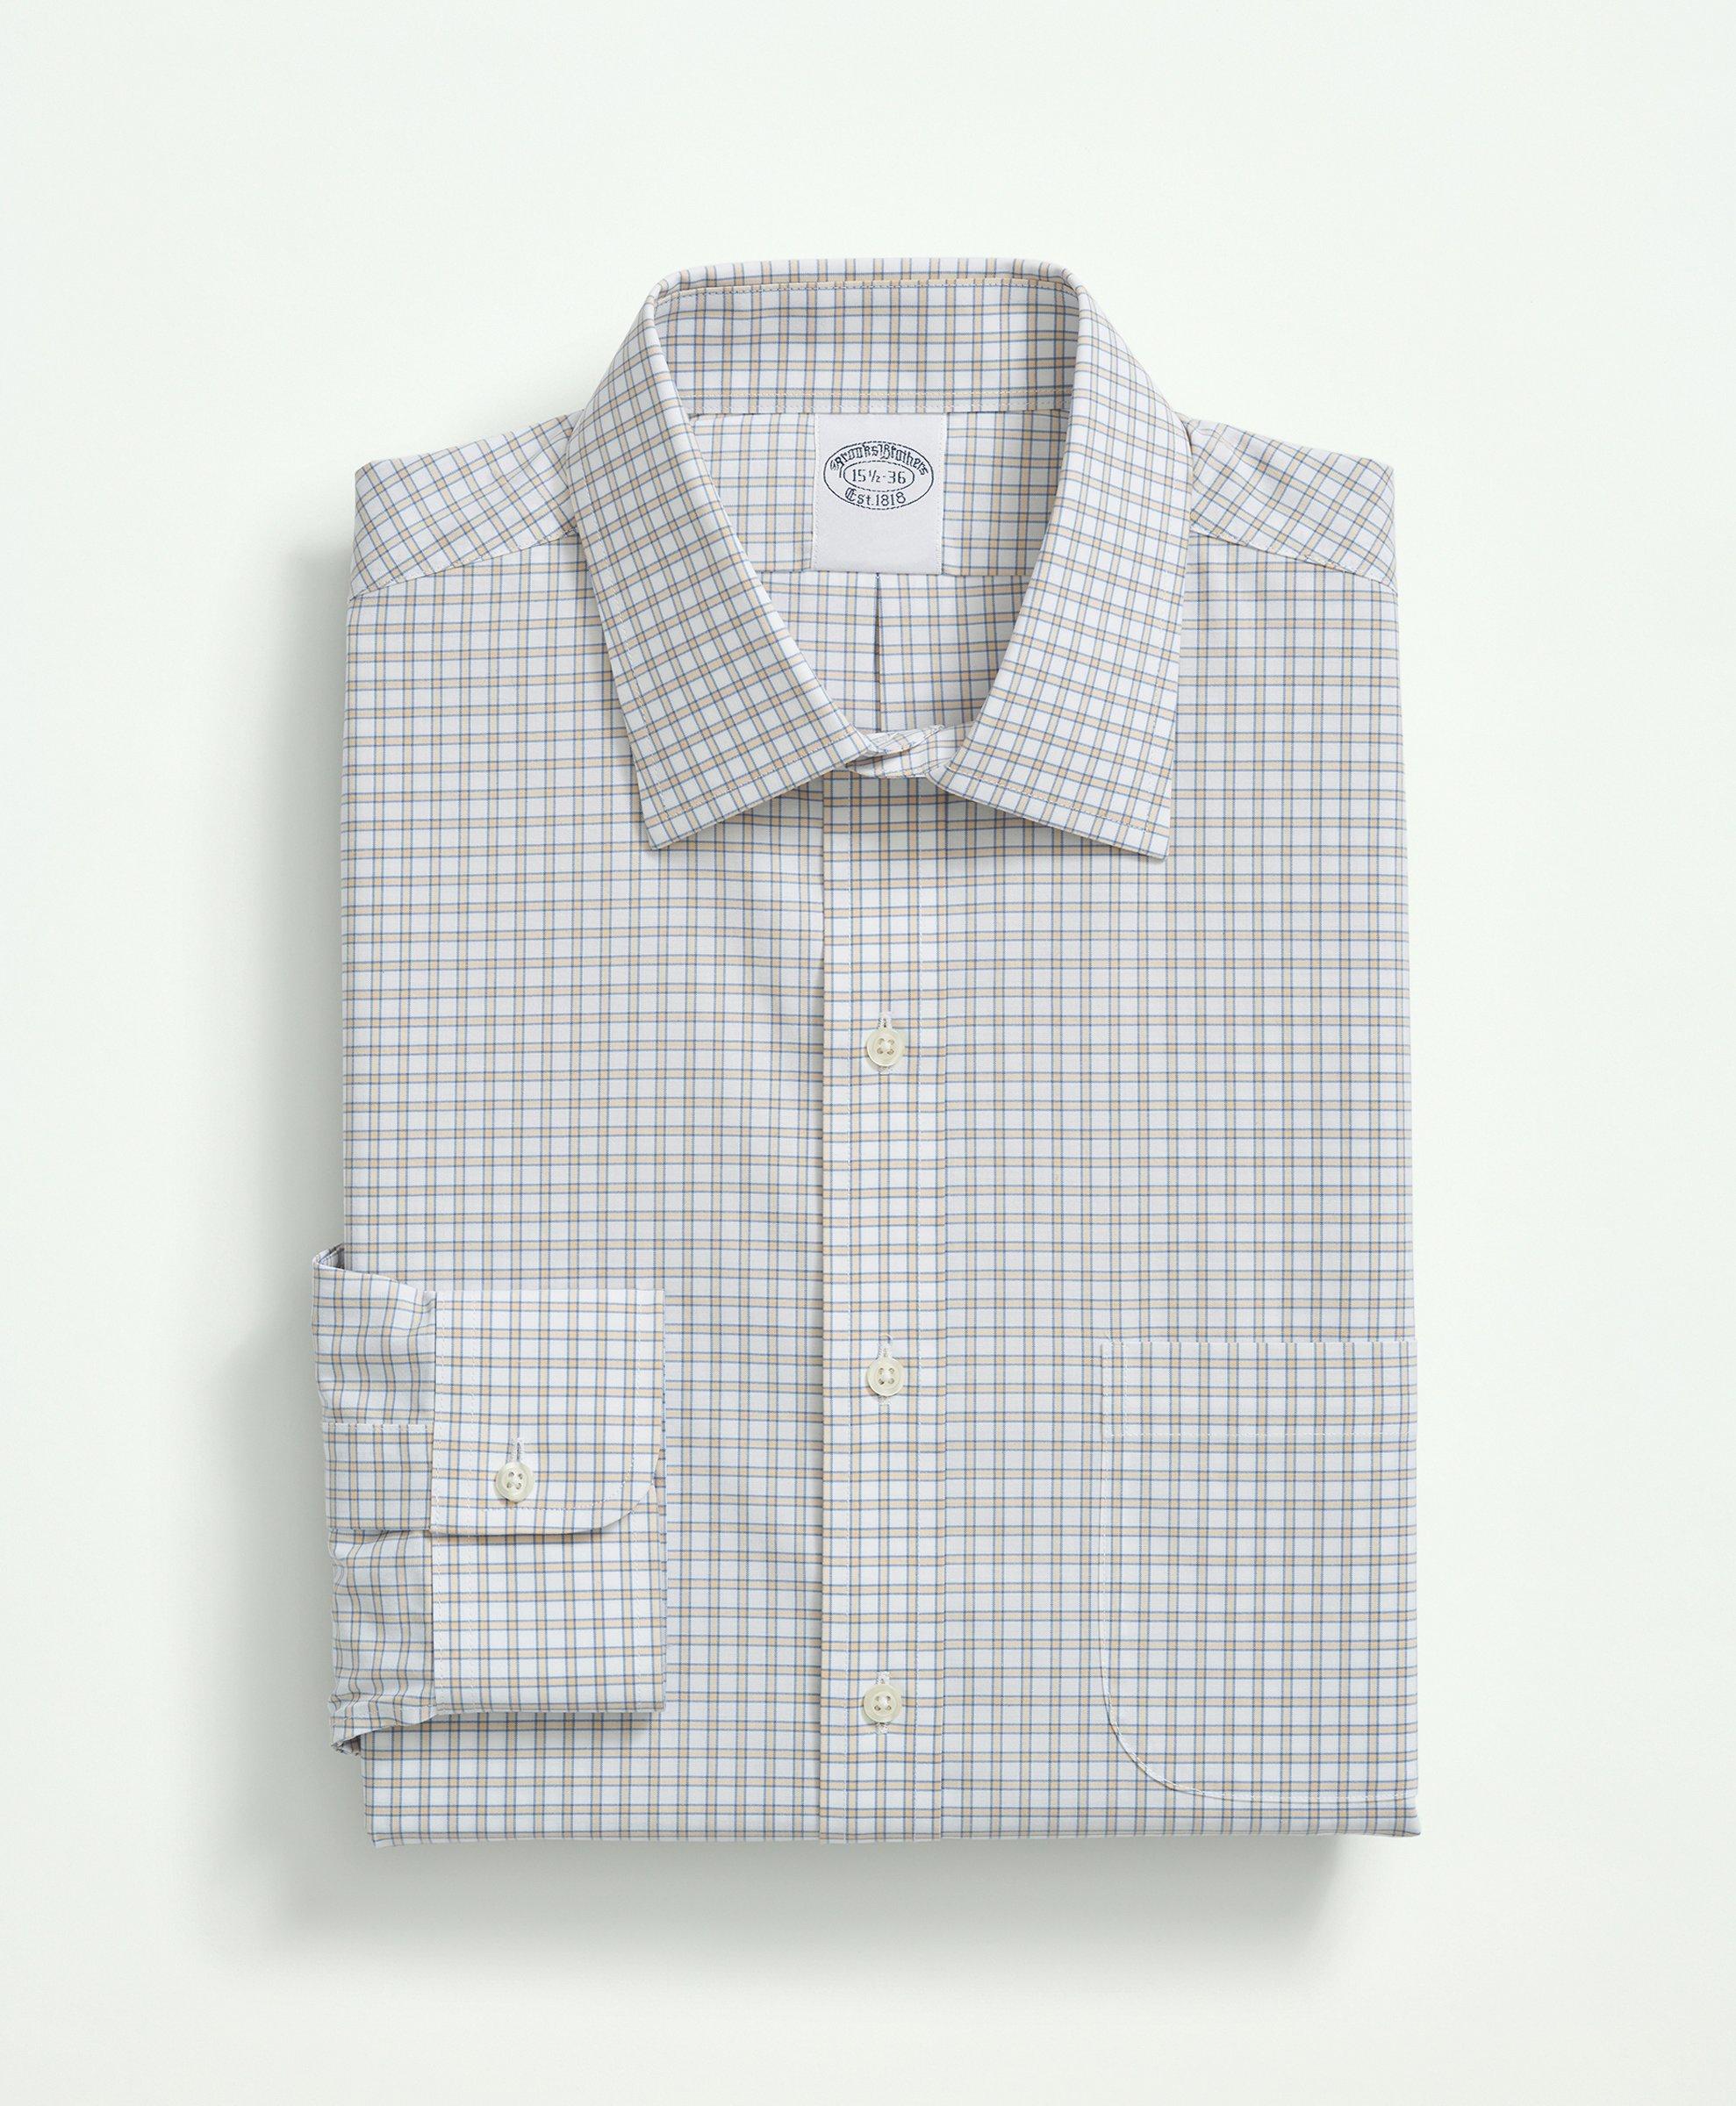 Men's pink fitted dress shirt with large checks and chambray